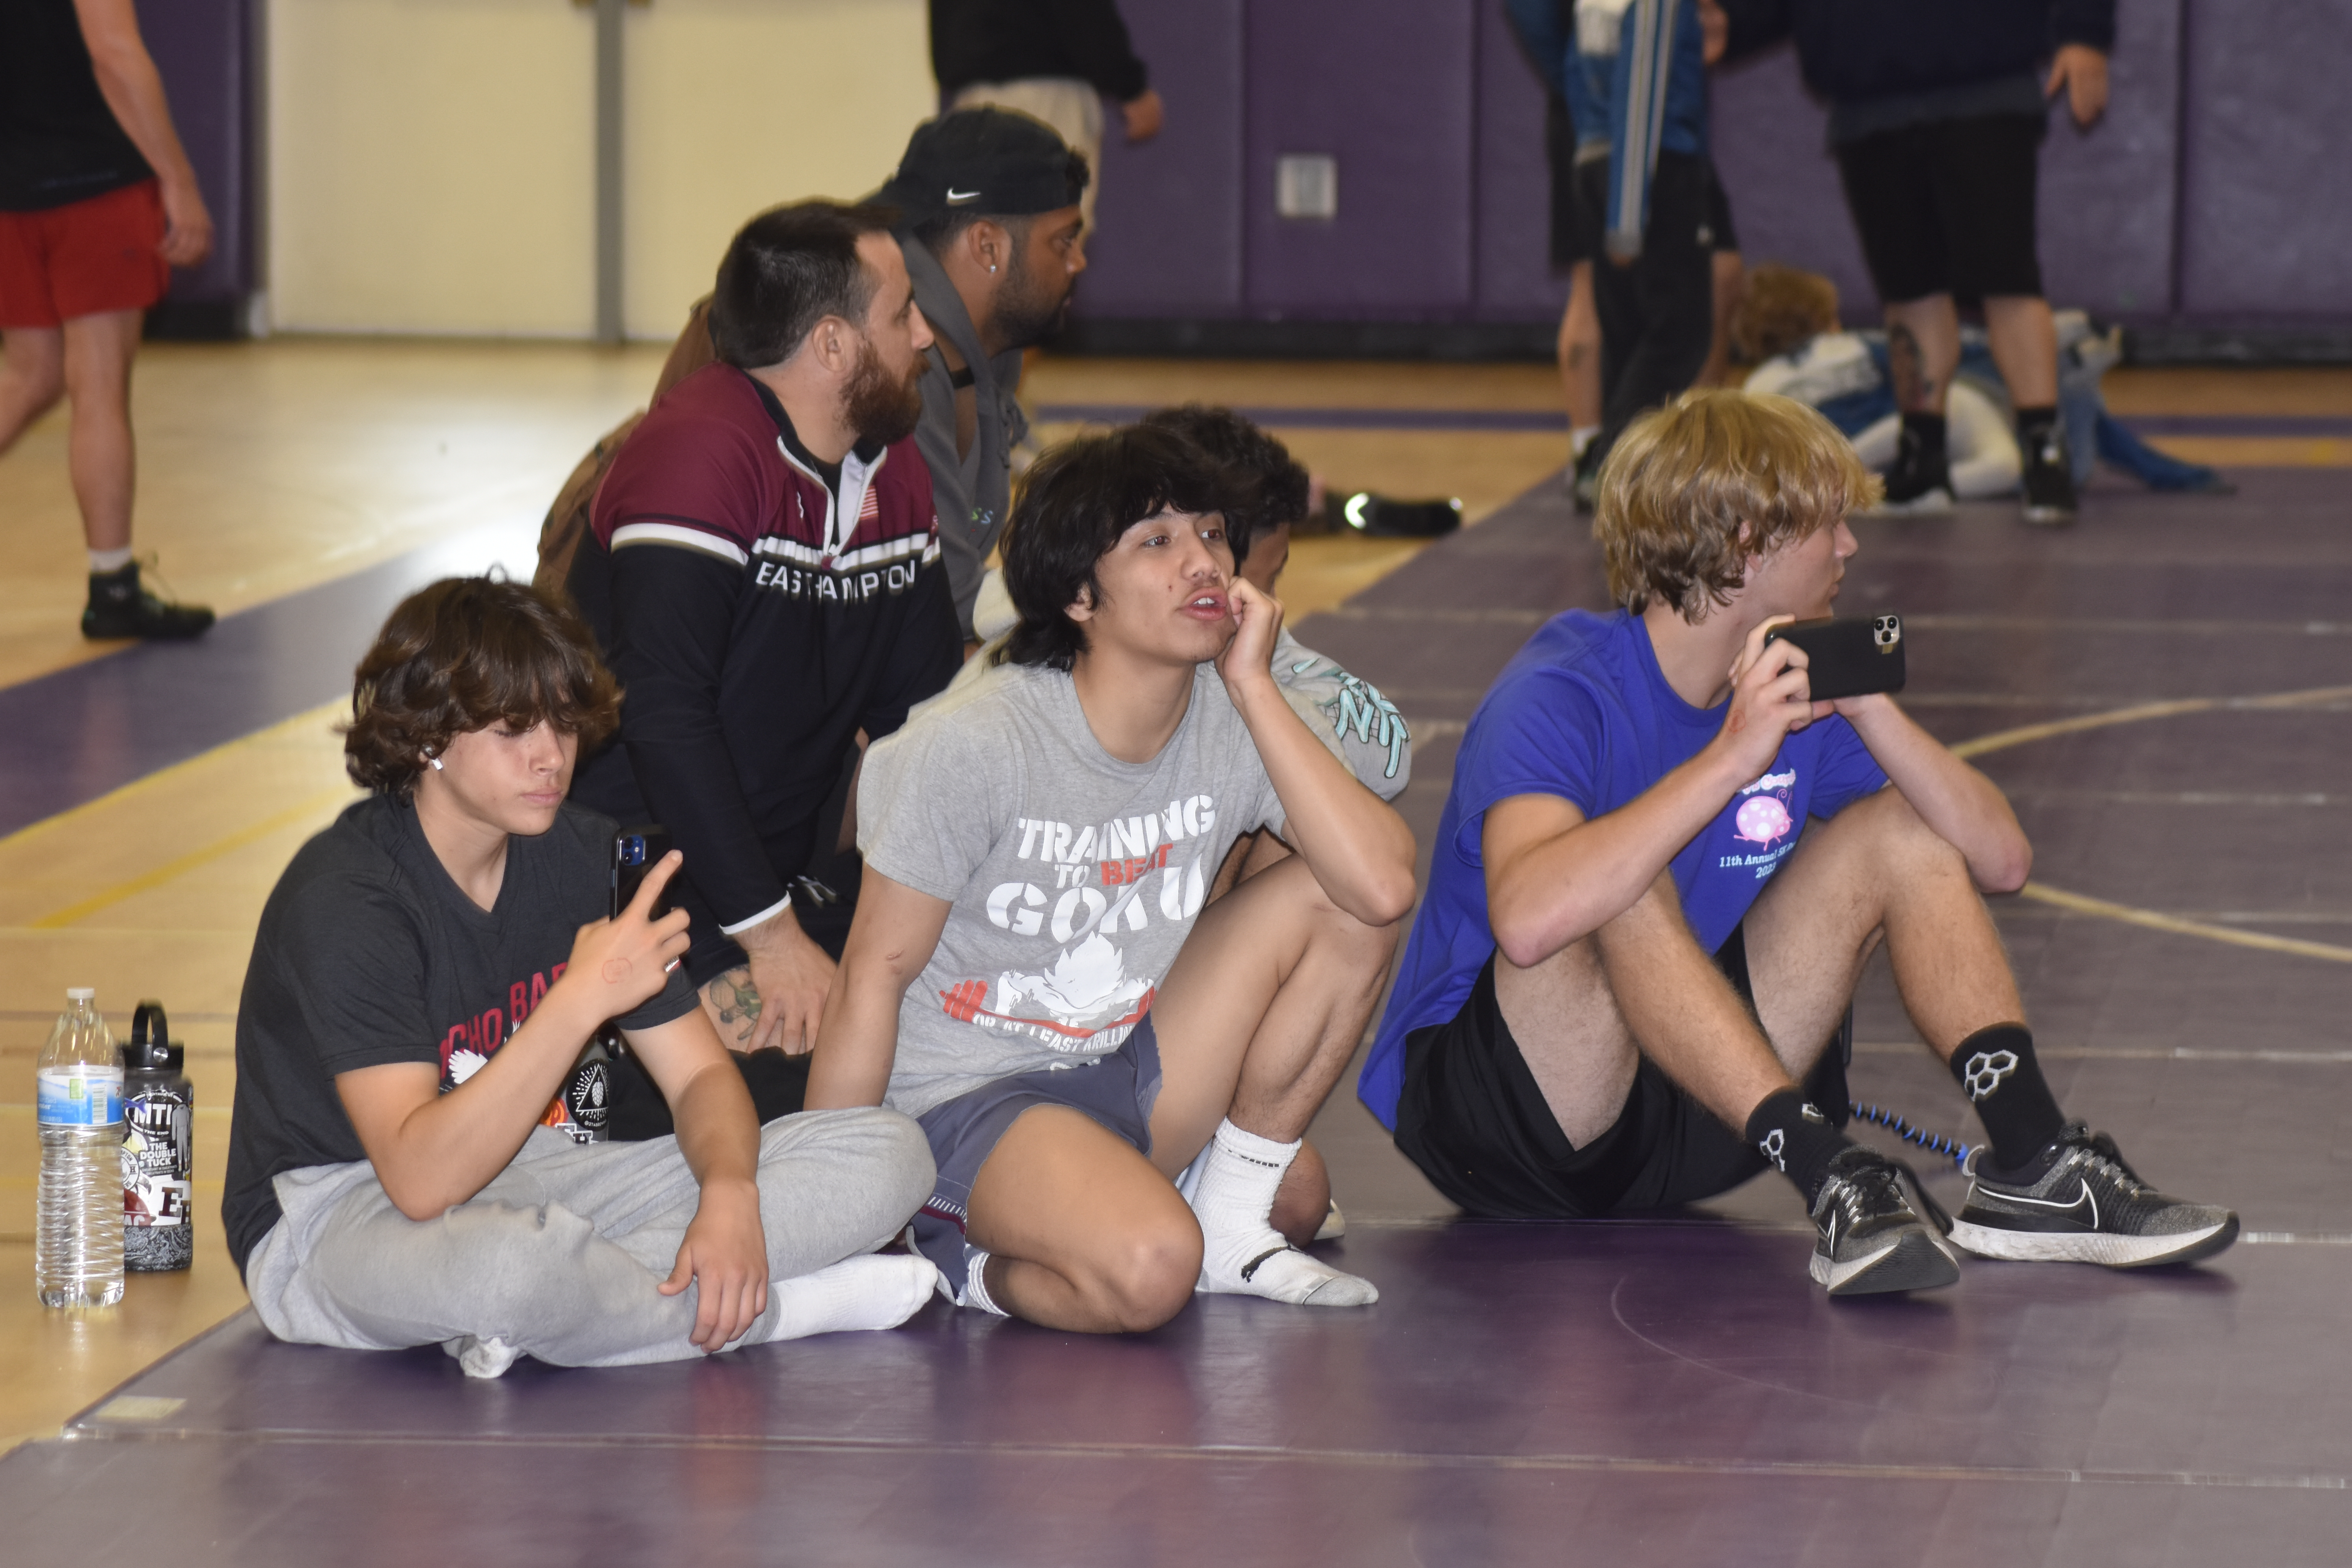 Current Bonac wrestlers cheer on their assistant coach   who is competing in a match.   DREW BUDD